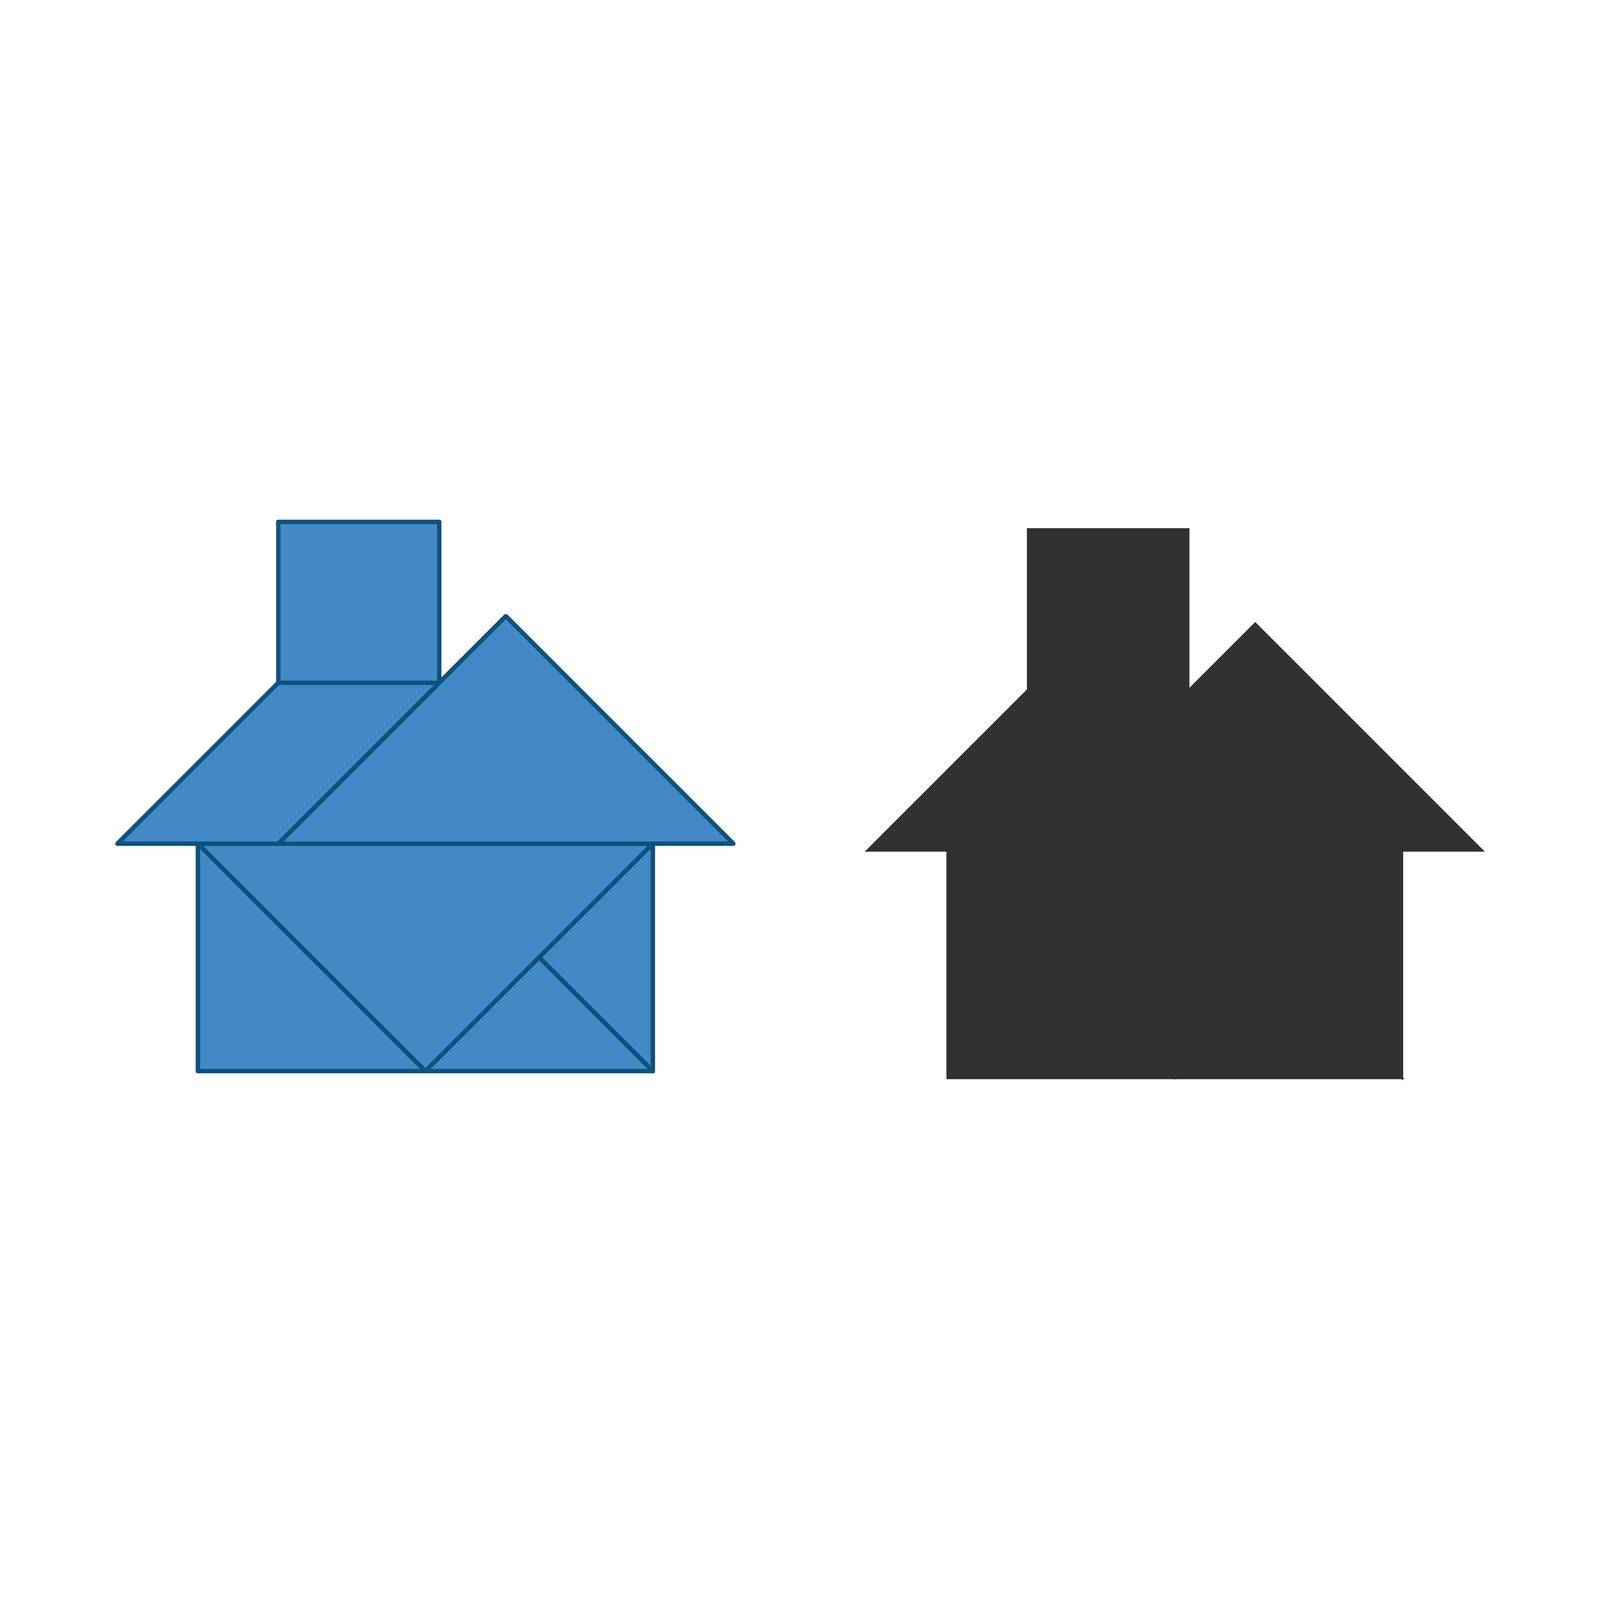 House Tangram. Traditional Chinese dissection puzzle, seven tiling pieces - geometric shapes: triangles, square rhombus , parallelogram. Board game for kids that helps to develop analytical skills. Vector illustration by Kyrylov